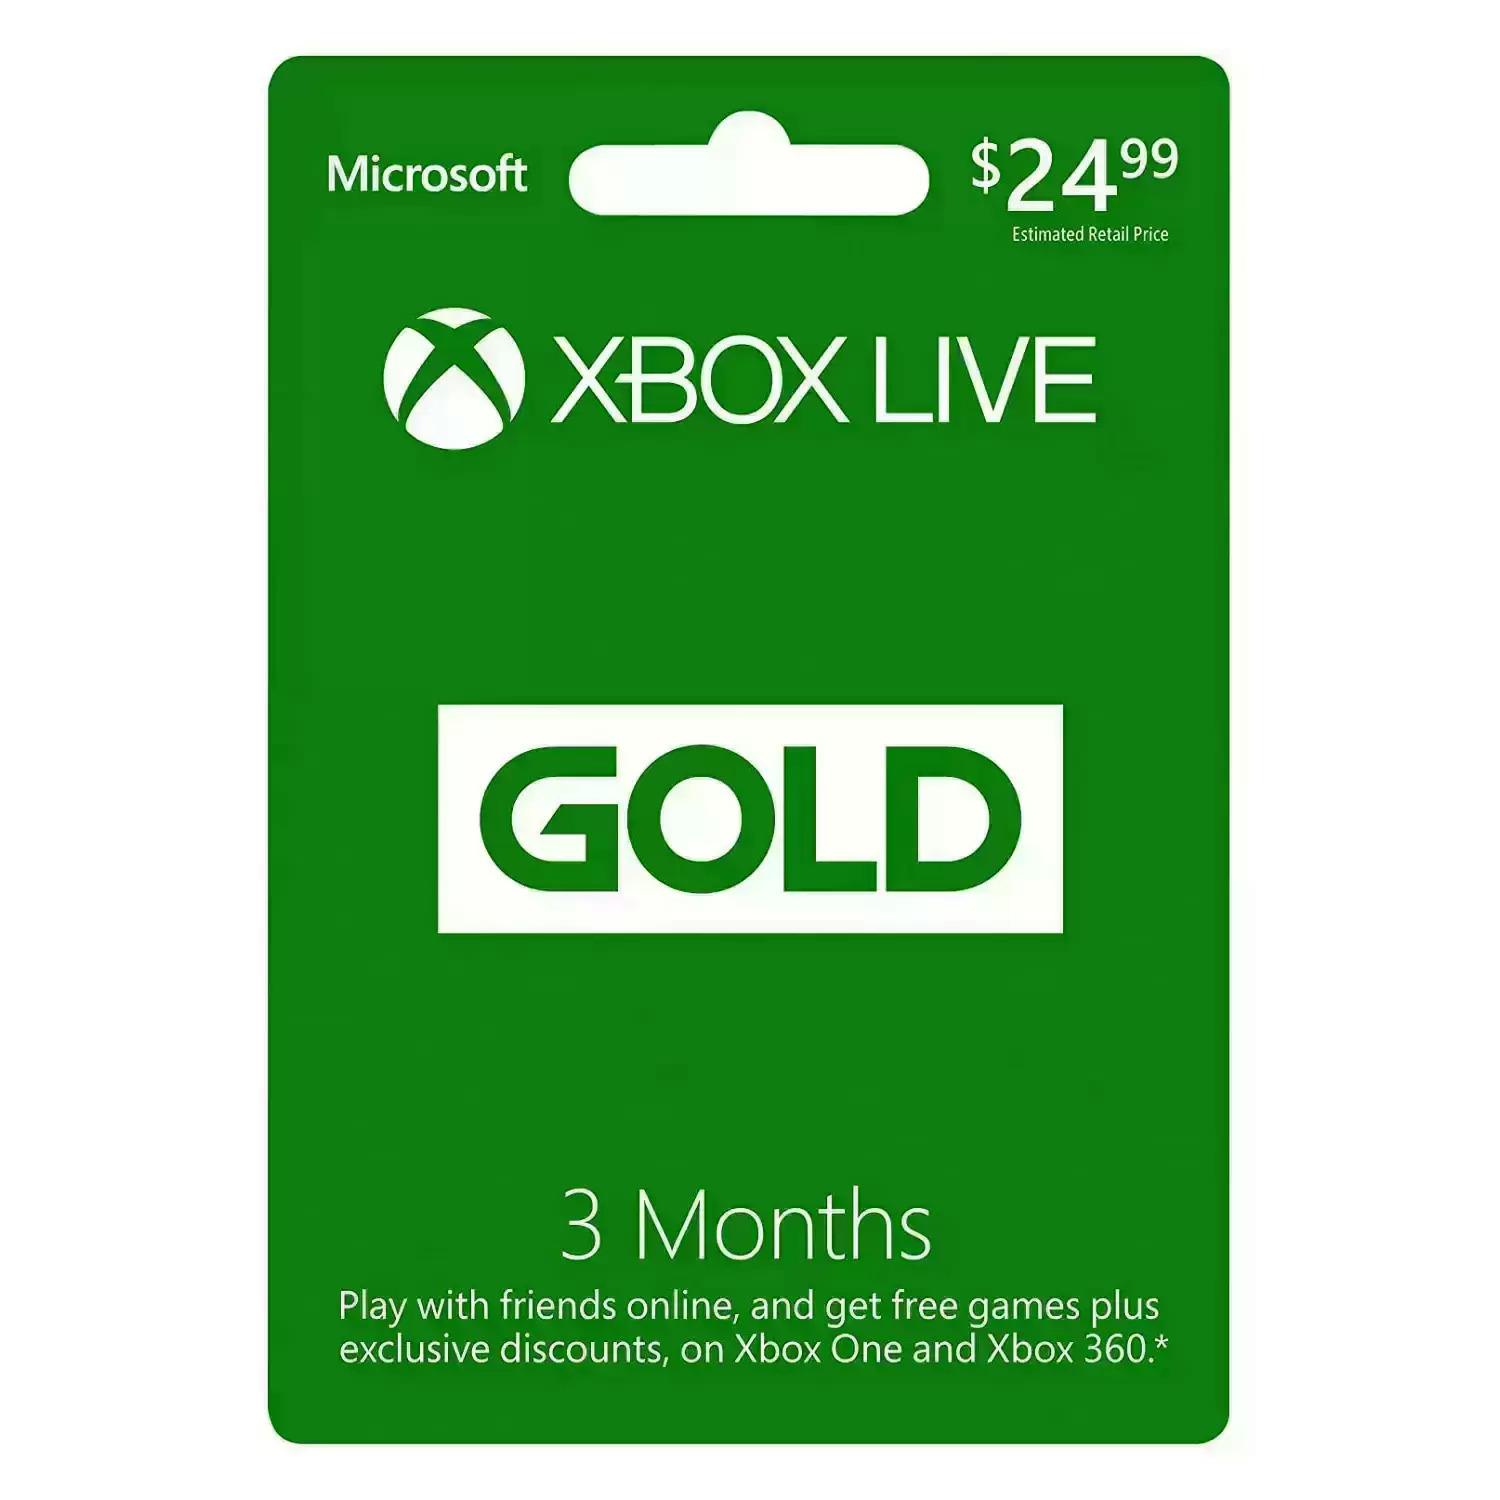 Xbox Live Gold 3 Month Subscription for $6.72